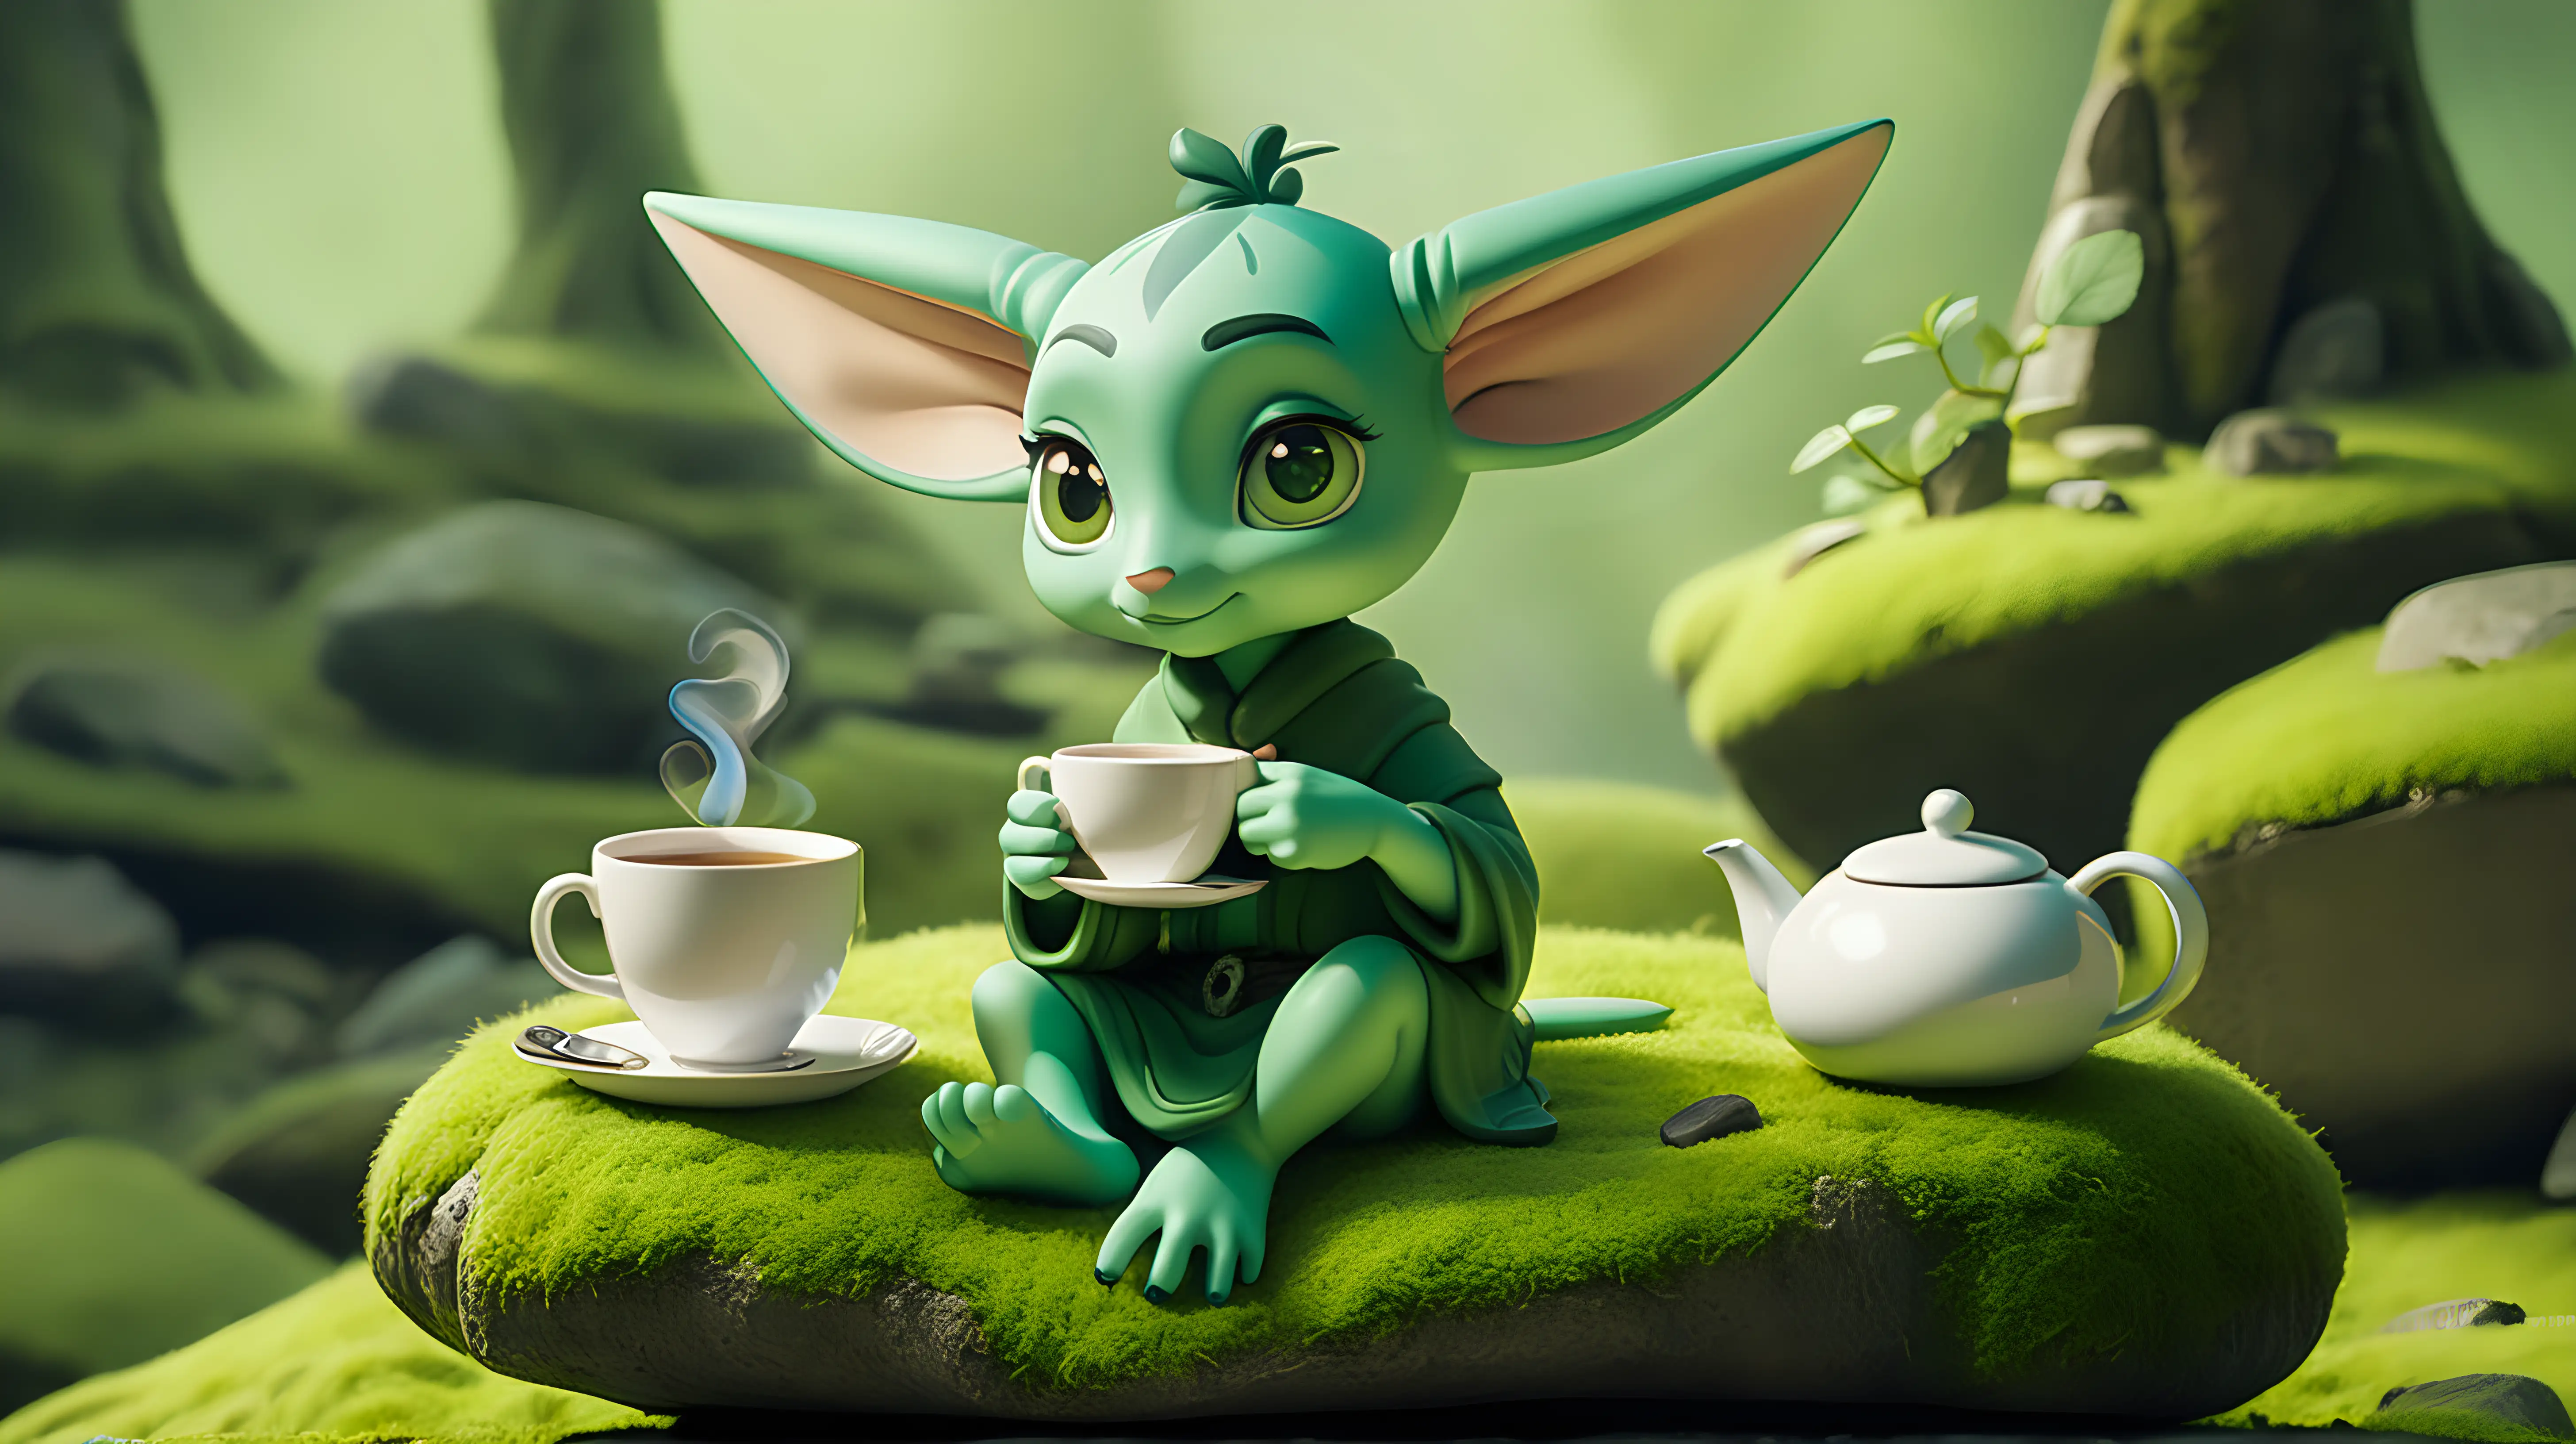 A cute, green figure with pointed ears, enjoying a cup of tea while perched on a moss-covered rock.